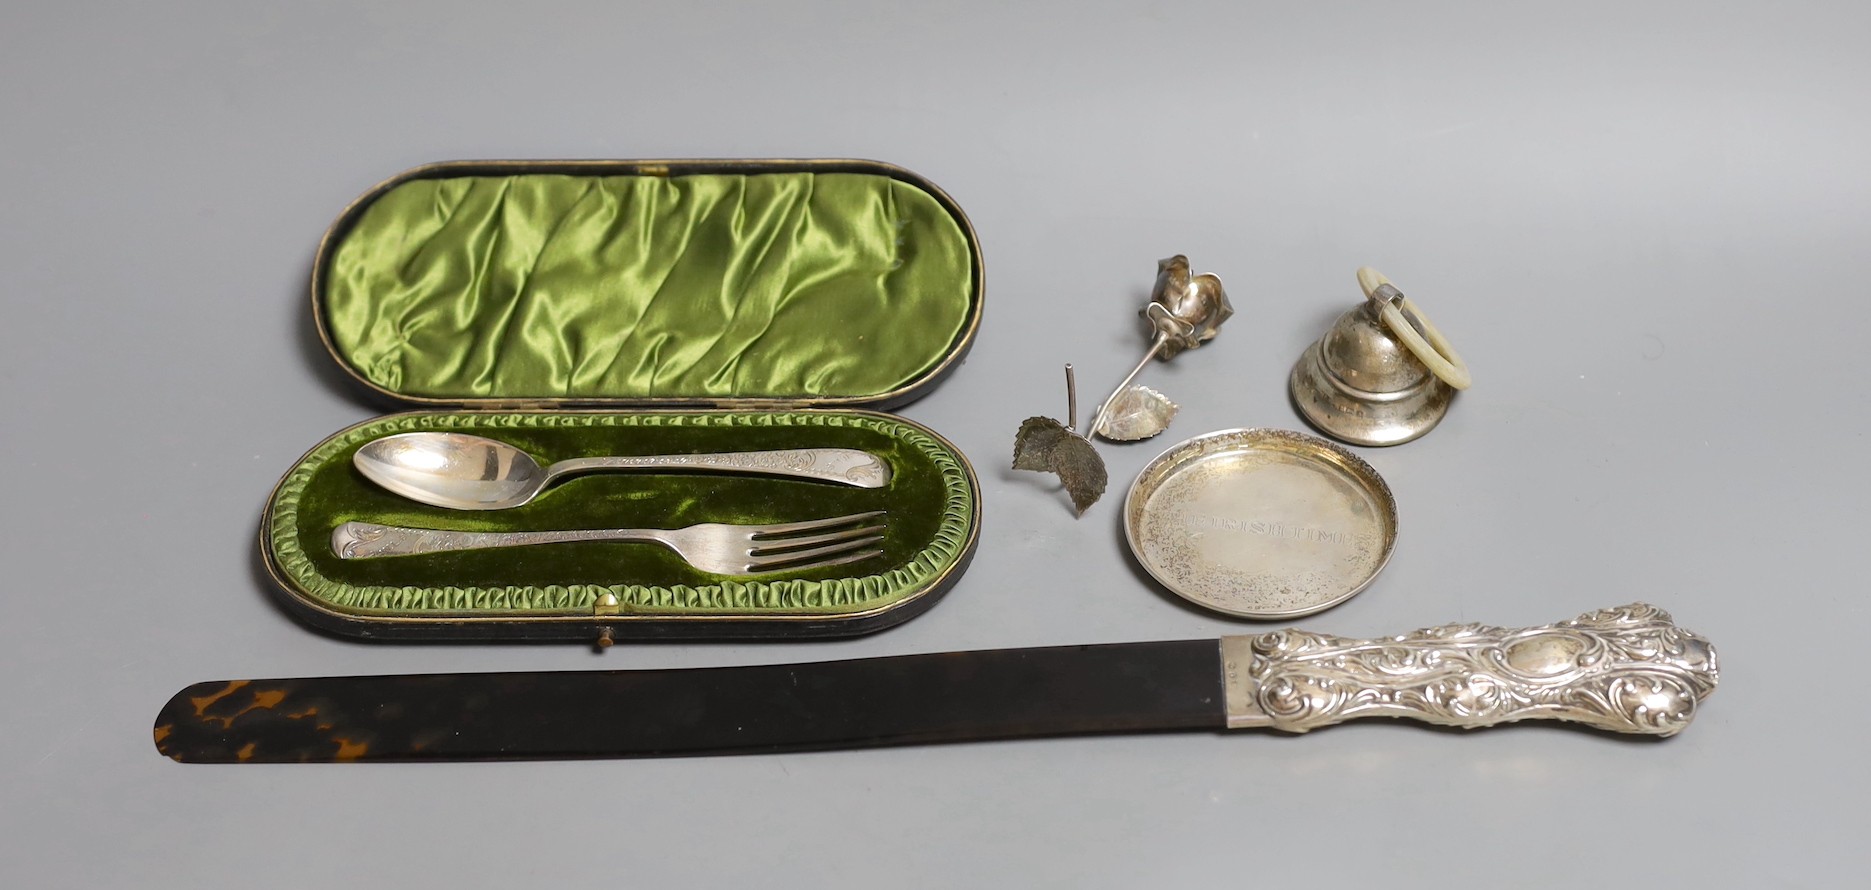 A late Victorian repousse silver mounted tortoiseshell page turner (chip), 39.6cm, a silver rattle, a silver the Irish Times pin tray, 800 standard model of a rose and a cased silver christening pair.